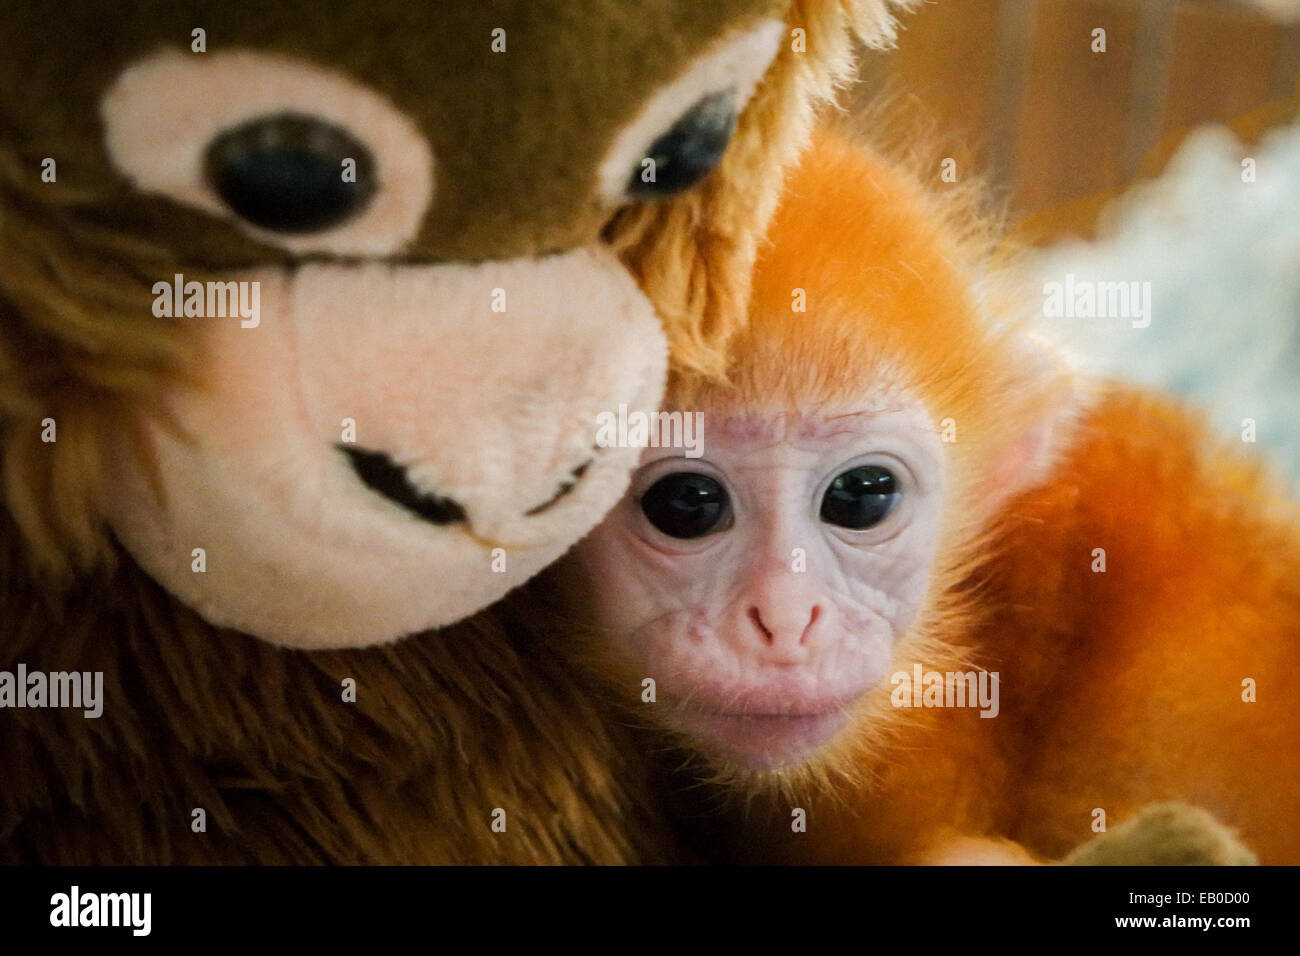 A baby lutung (eastern Javan langur) holding a primate doll to reduce its stress level during a treatment at a veterinary facility in Bali, Indonesia. Stock Photo